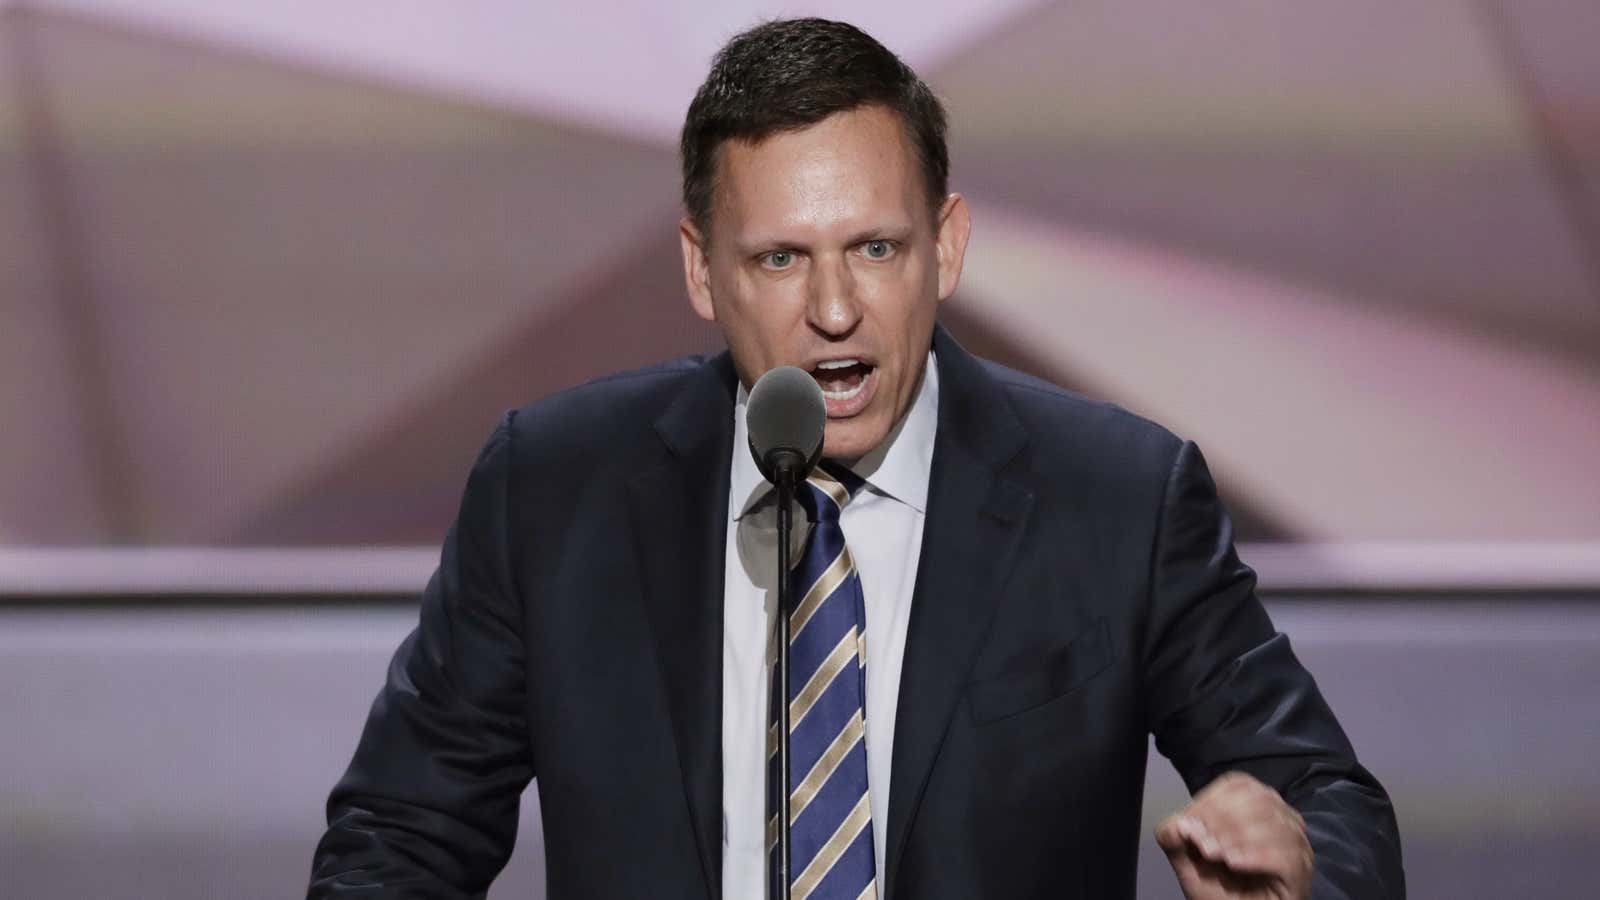 Peter Thiel, a real Silicon Valley libertarian, speaking at the Republican National Convention in 2016.